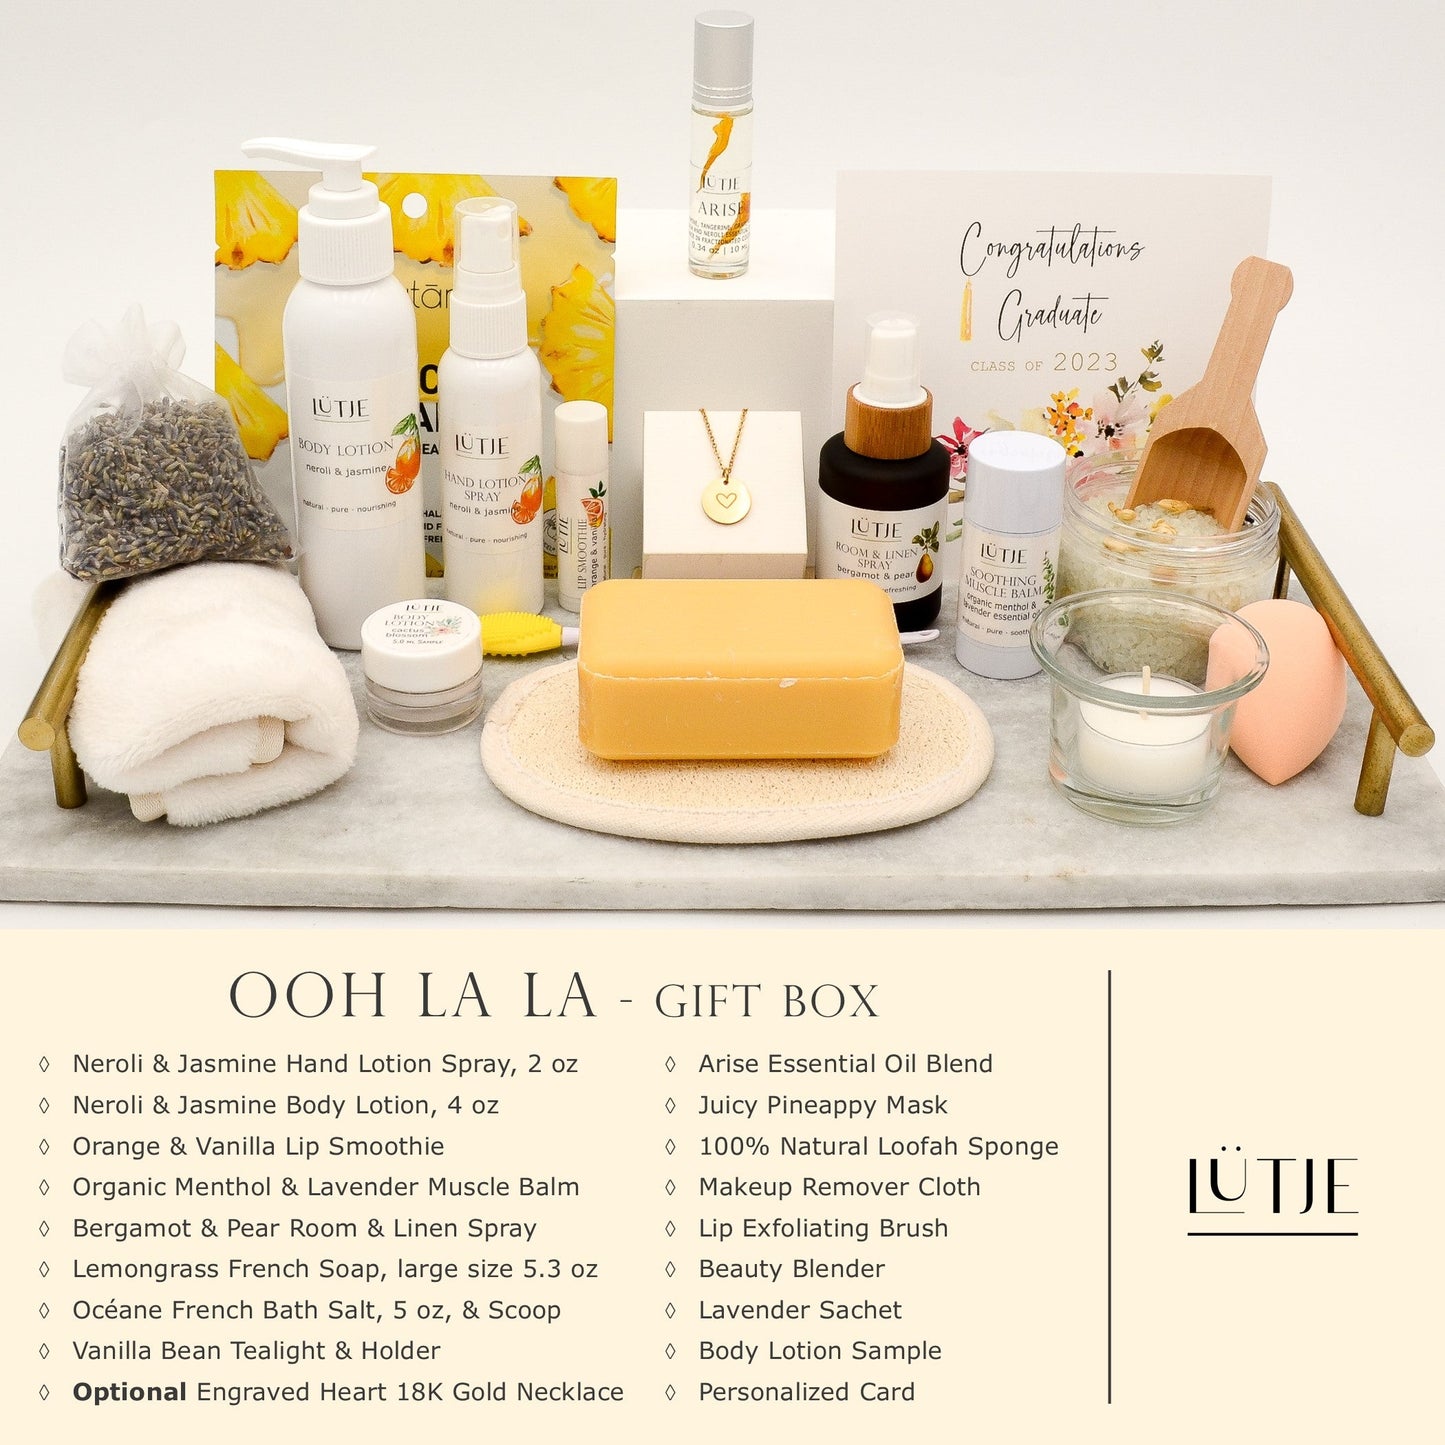 Ooh La La Gift Box for women, wife, daughter, BFF, sister, mom, or grandma, includes Neroli & Jasmine hand lotion spray and body lotion, essential oil, lip balm, soothing muscle balm, Bergamot & Pear room & linen spray, French soap, French bath salts, hydrating face mask, other bath, spa and self-care items, and optional 18K gold-plated necklace with engraved heart.